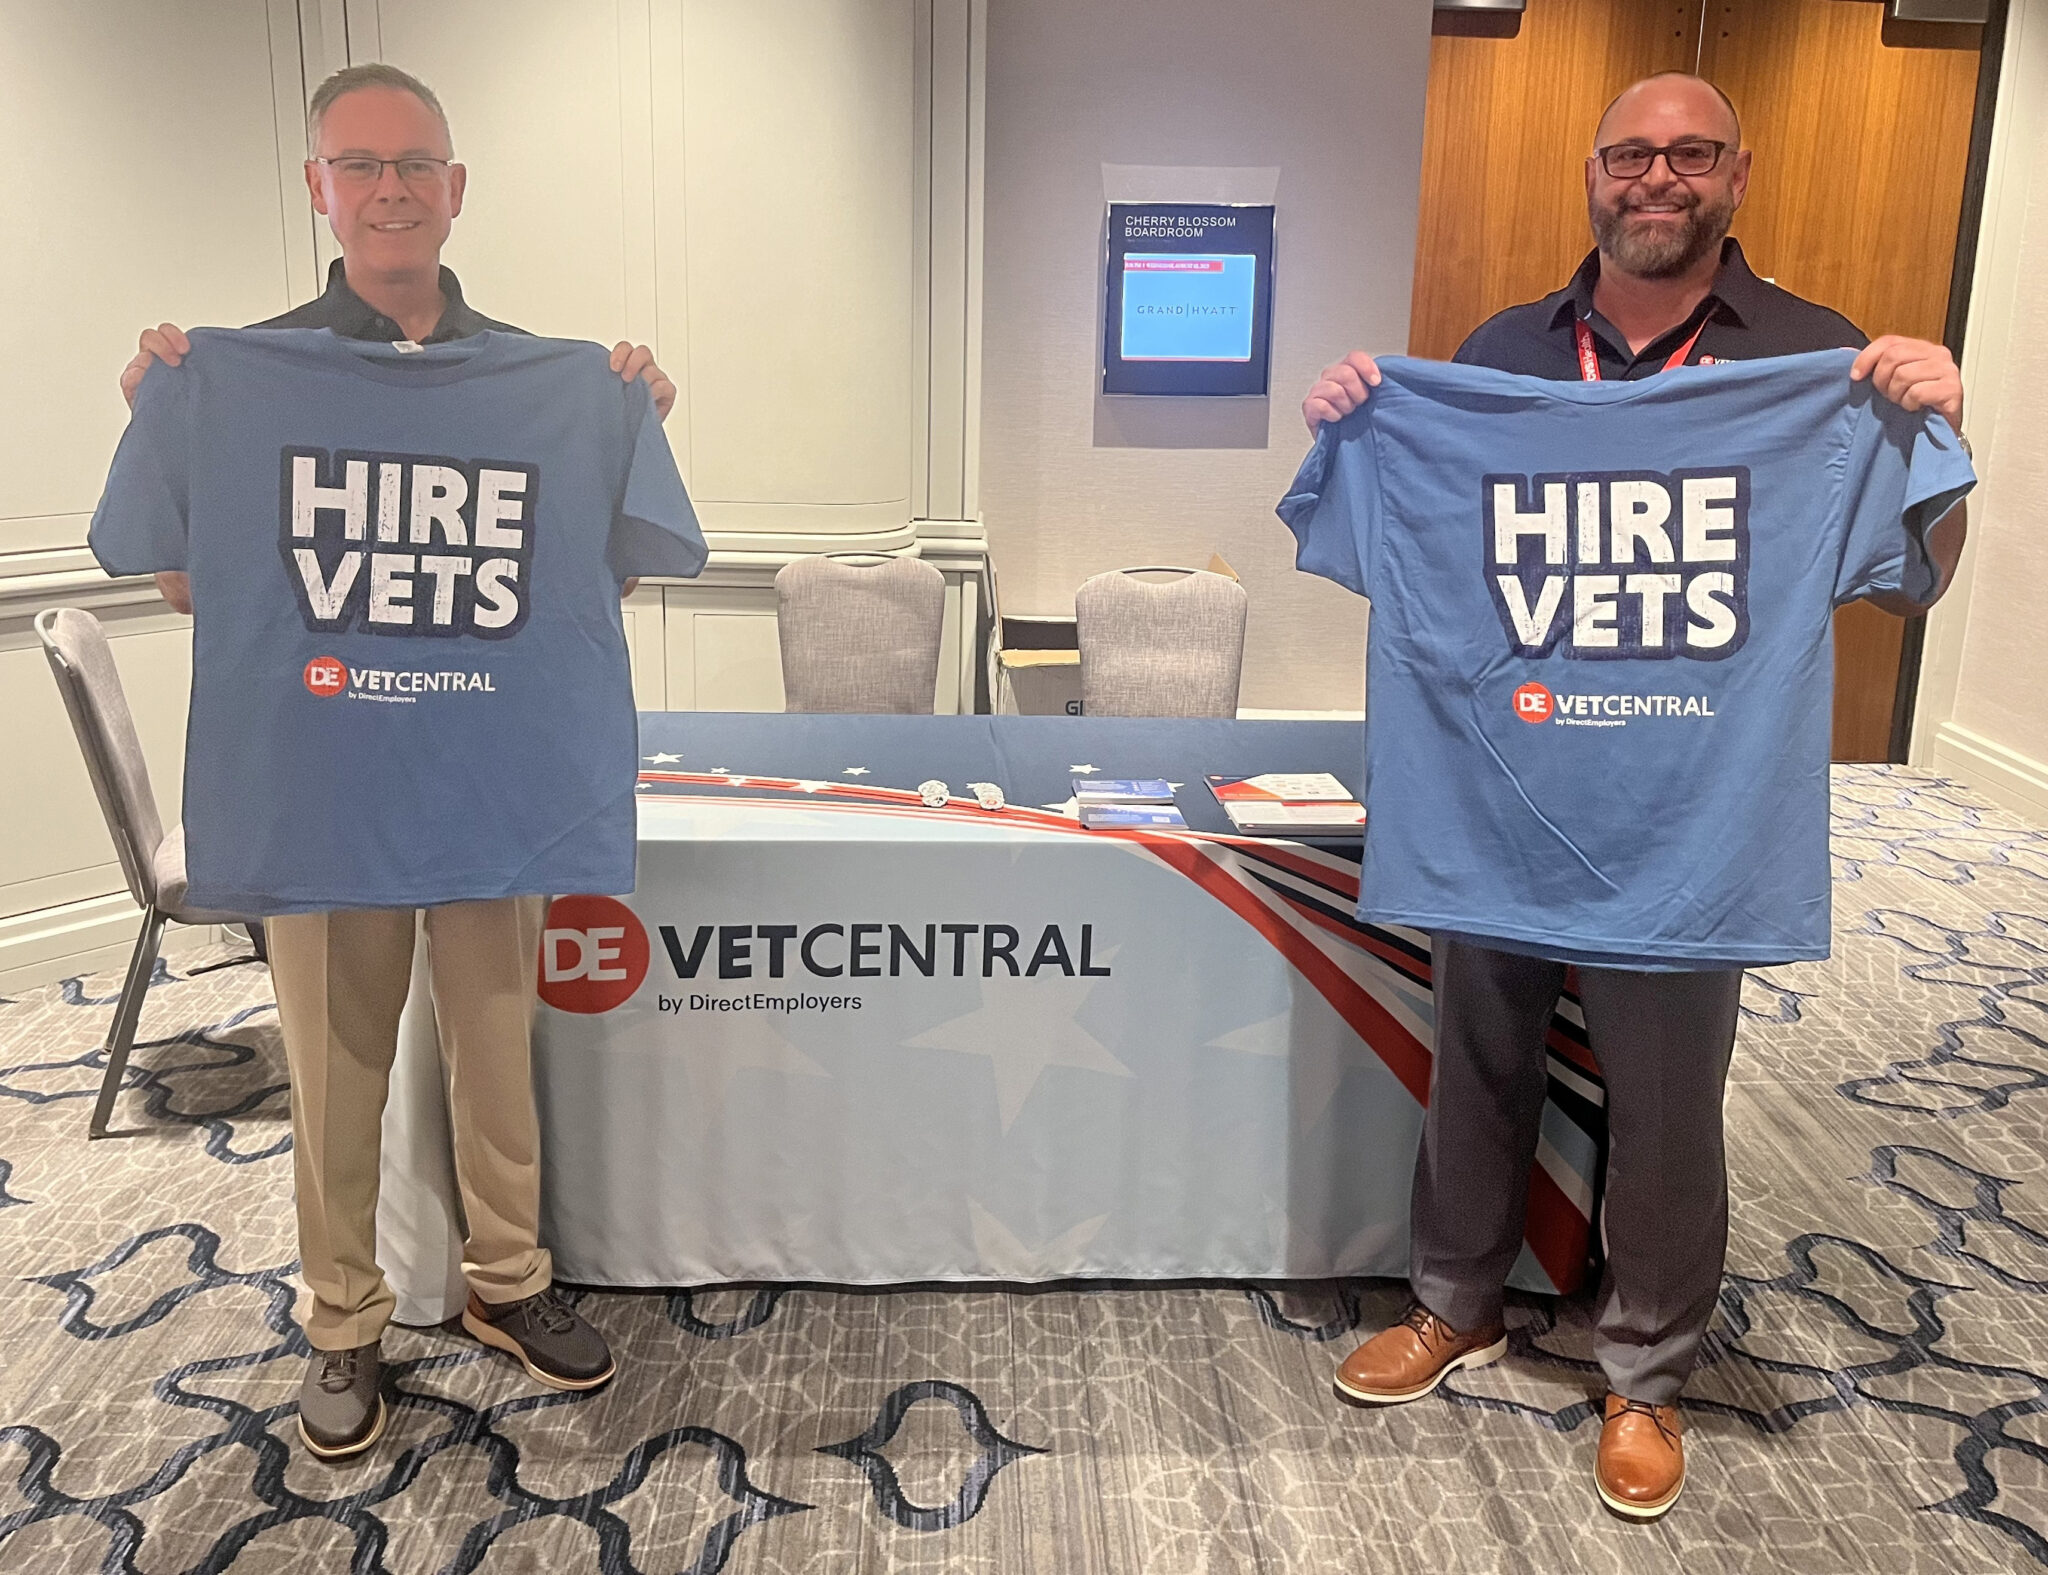 Michael and Ralph holding up Hire Vets t-shirts